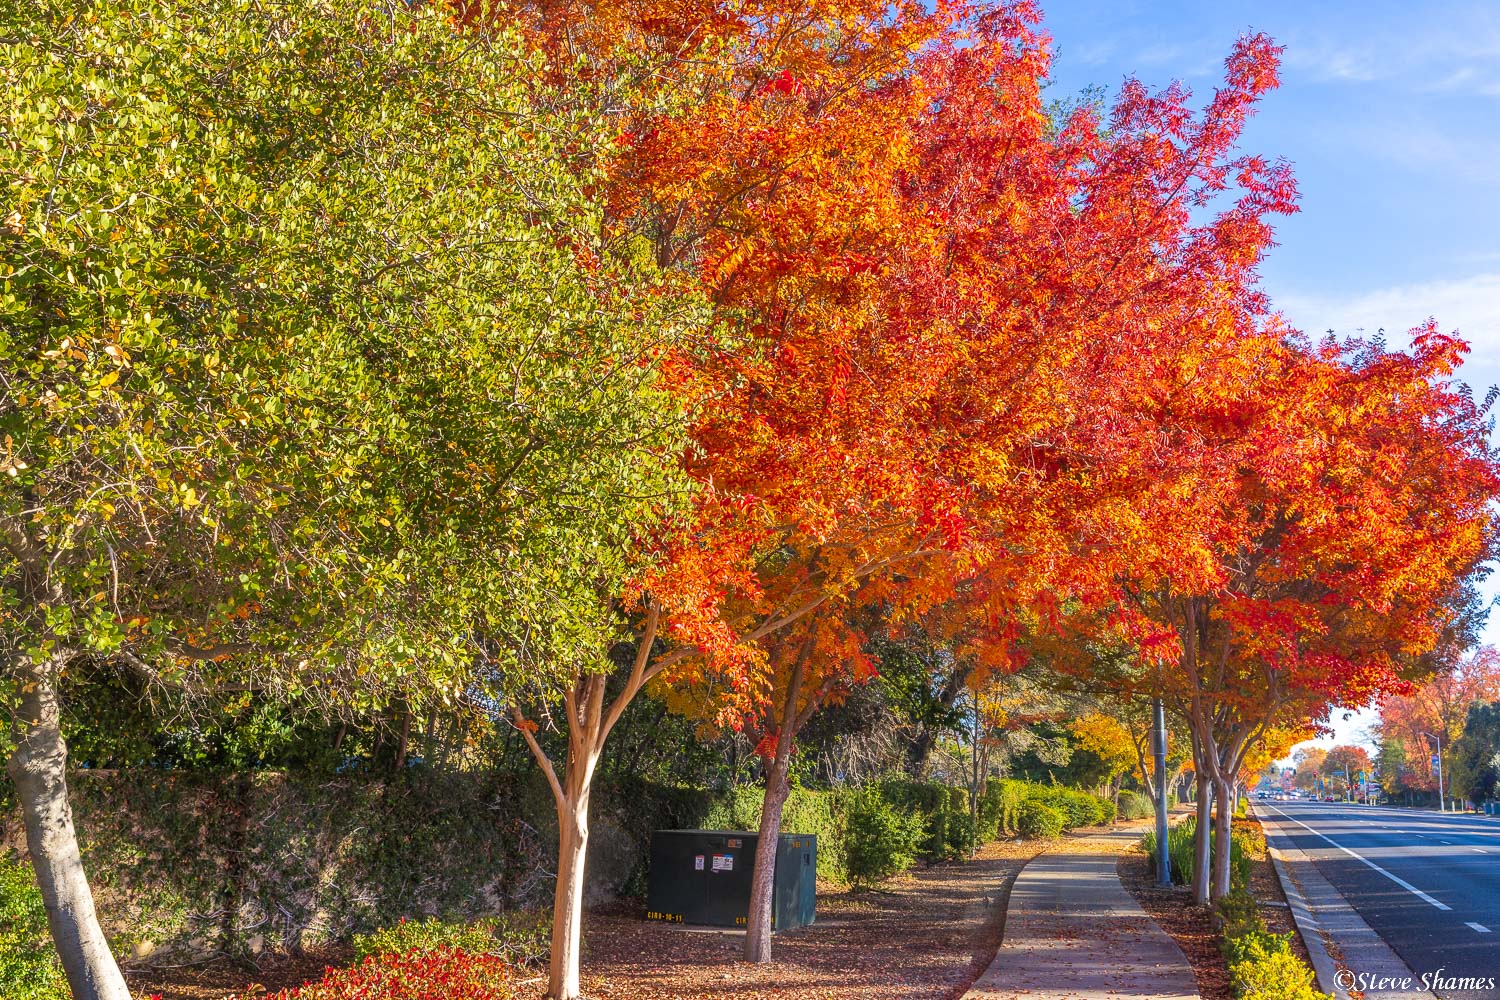 Along Coloma Road in the city of Rancho Cordova, I saw these great fall colors.